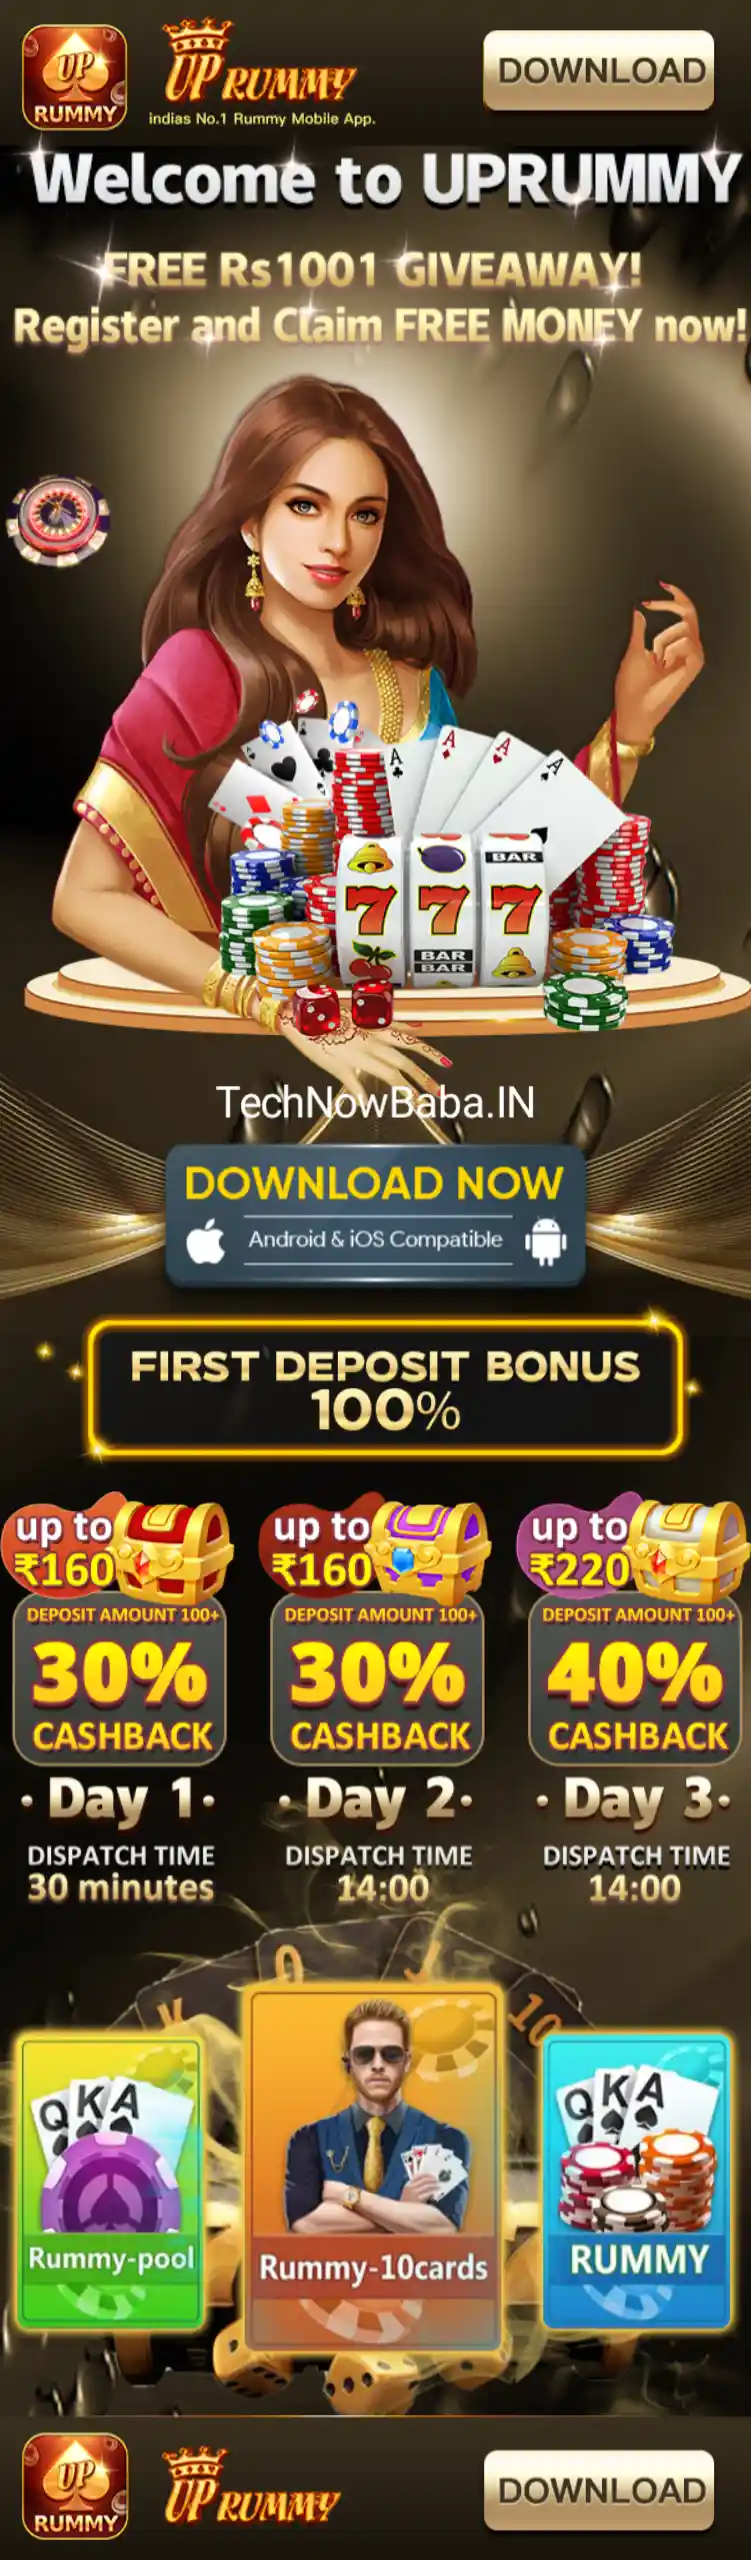 UP Rummy App Tech Now Baba